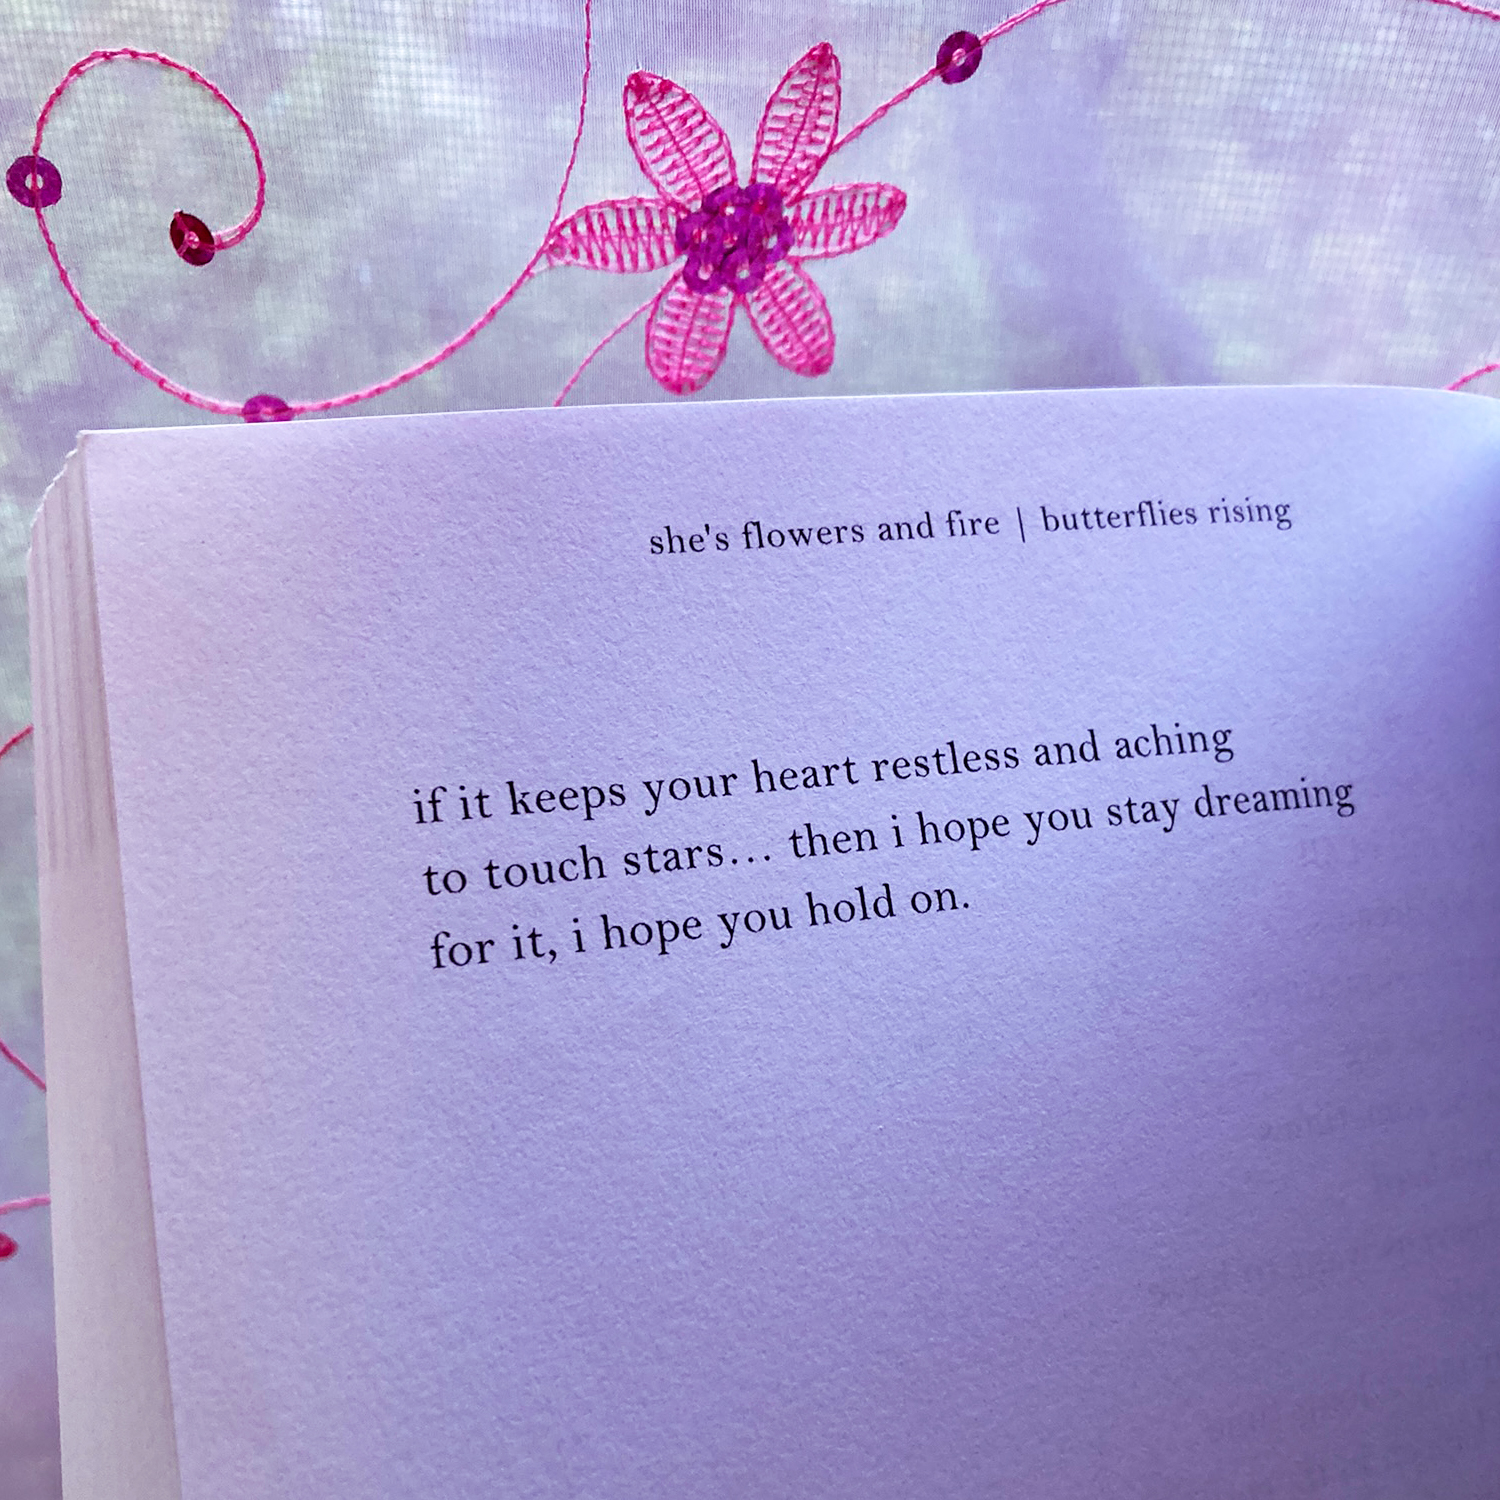 if it keeps your heart restless and aching to touch stars - butterflies rising quote